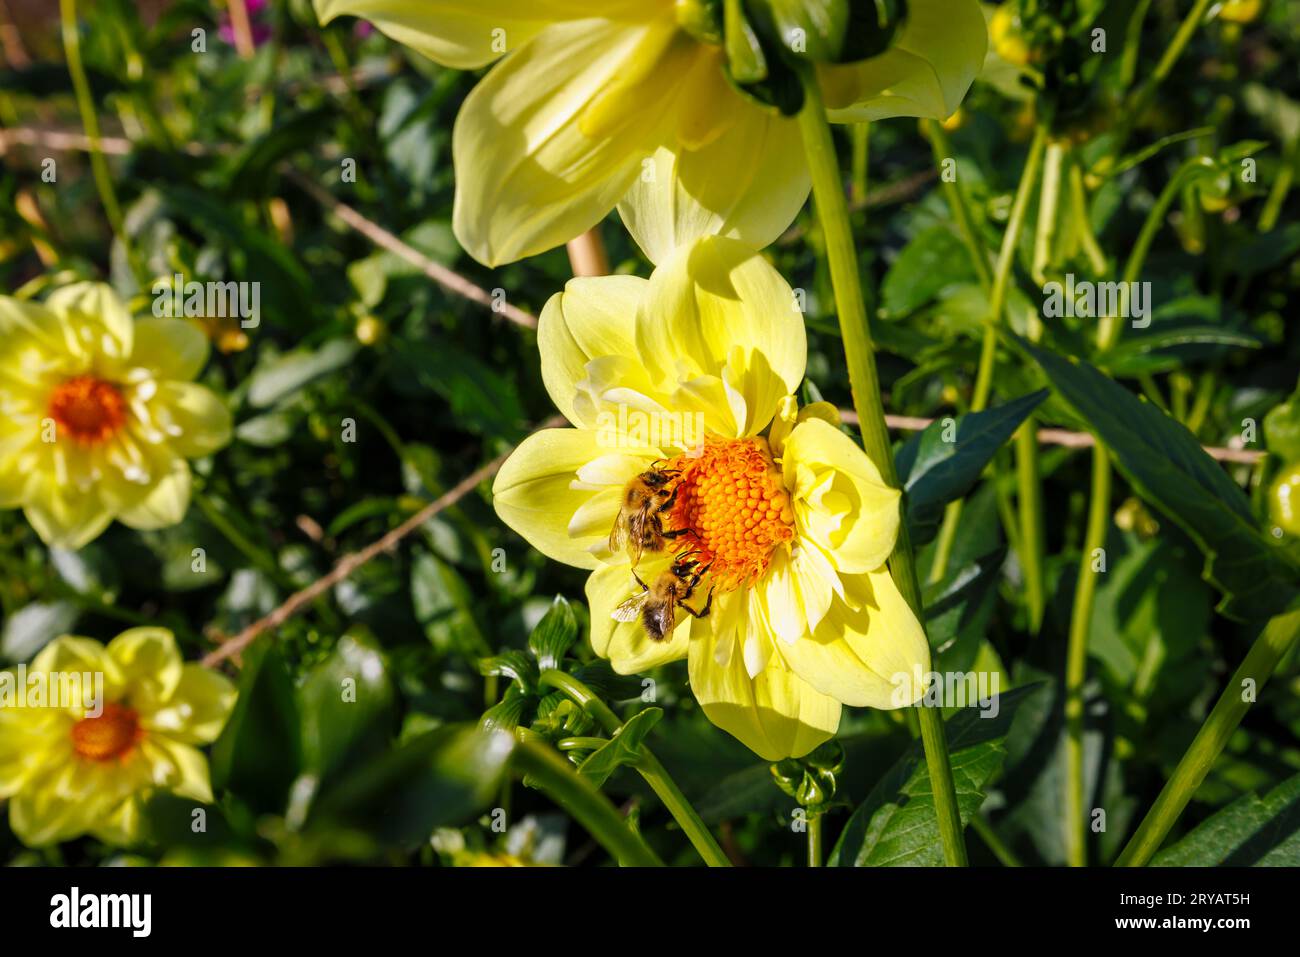 2 bees feeding on nectar from the disc florets of a yellow flower of Dahlia 'Lemon Sherbet' at RHS Garden Wisley, Surrey, SE England in early autumn Stock Photo